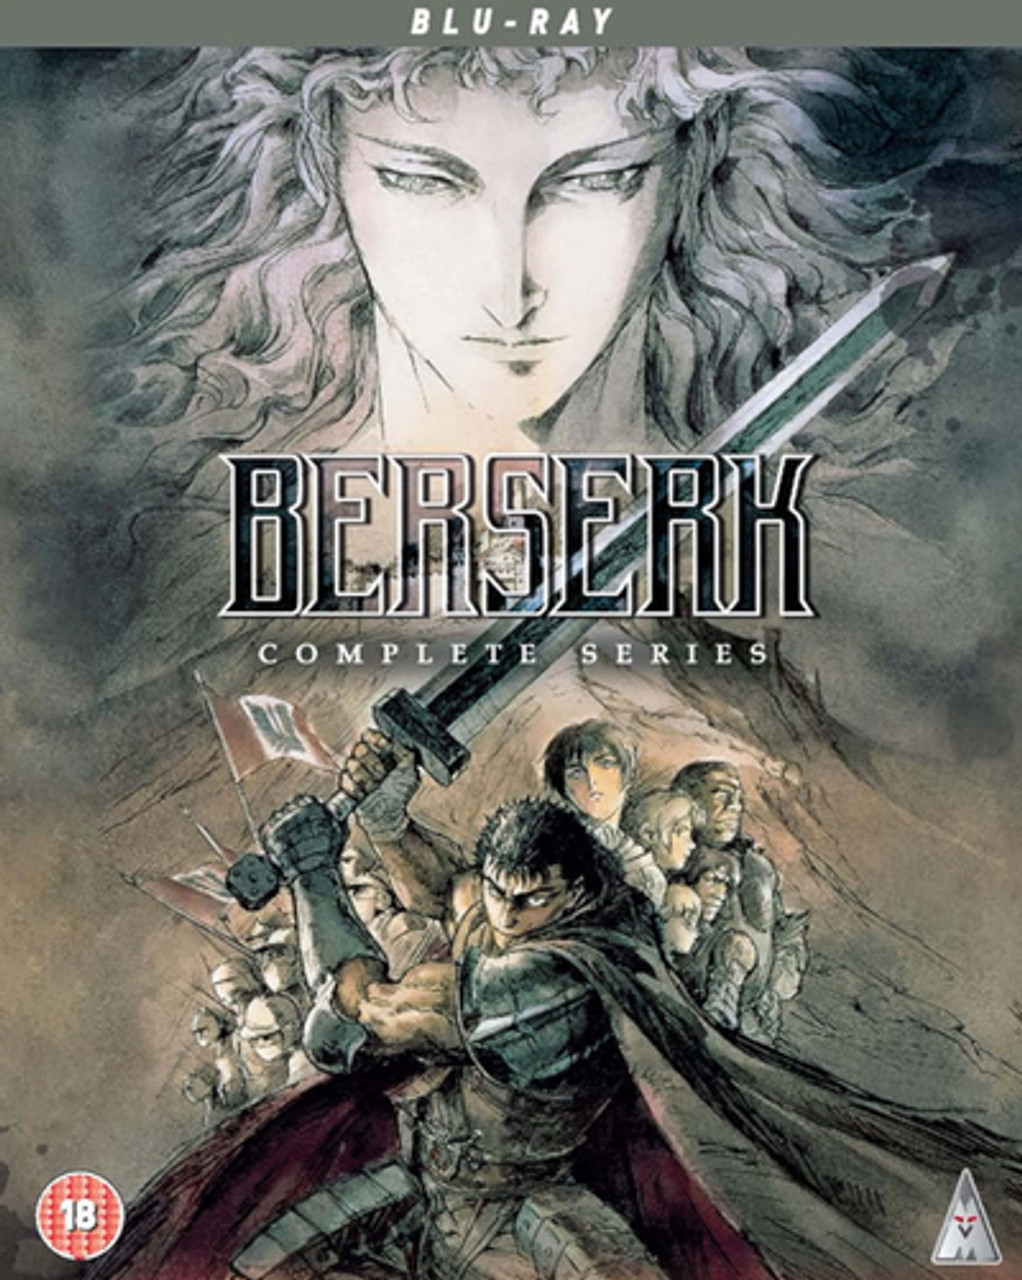 Berserk: The Complete Series on Blu-ray Is Up for Preorder - IGN